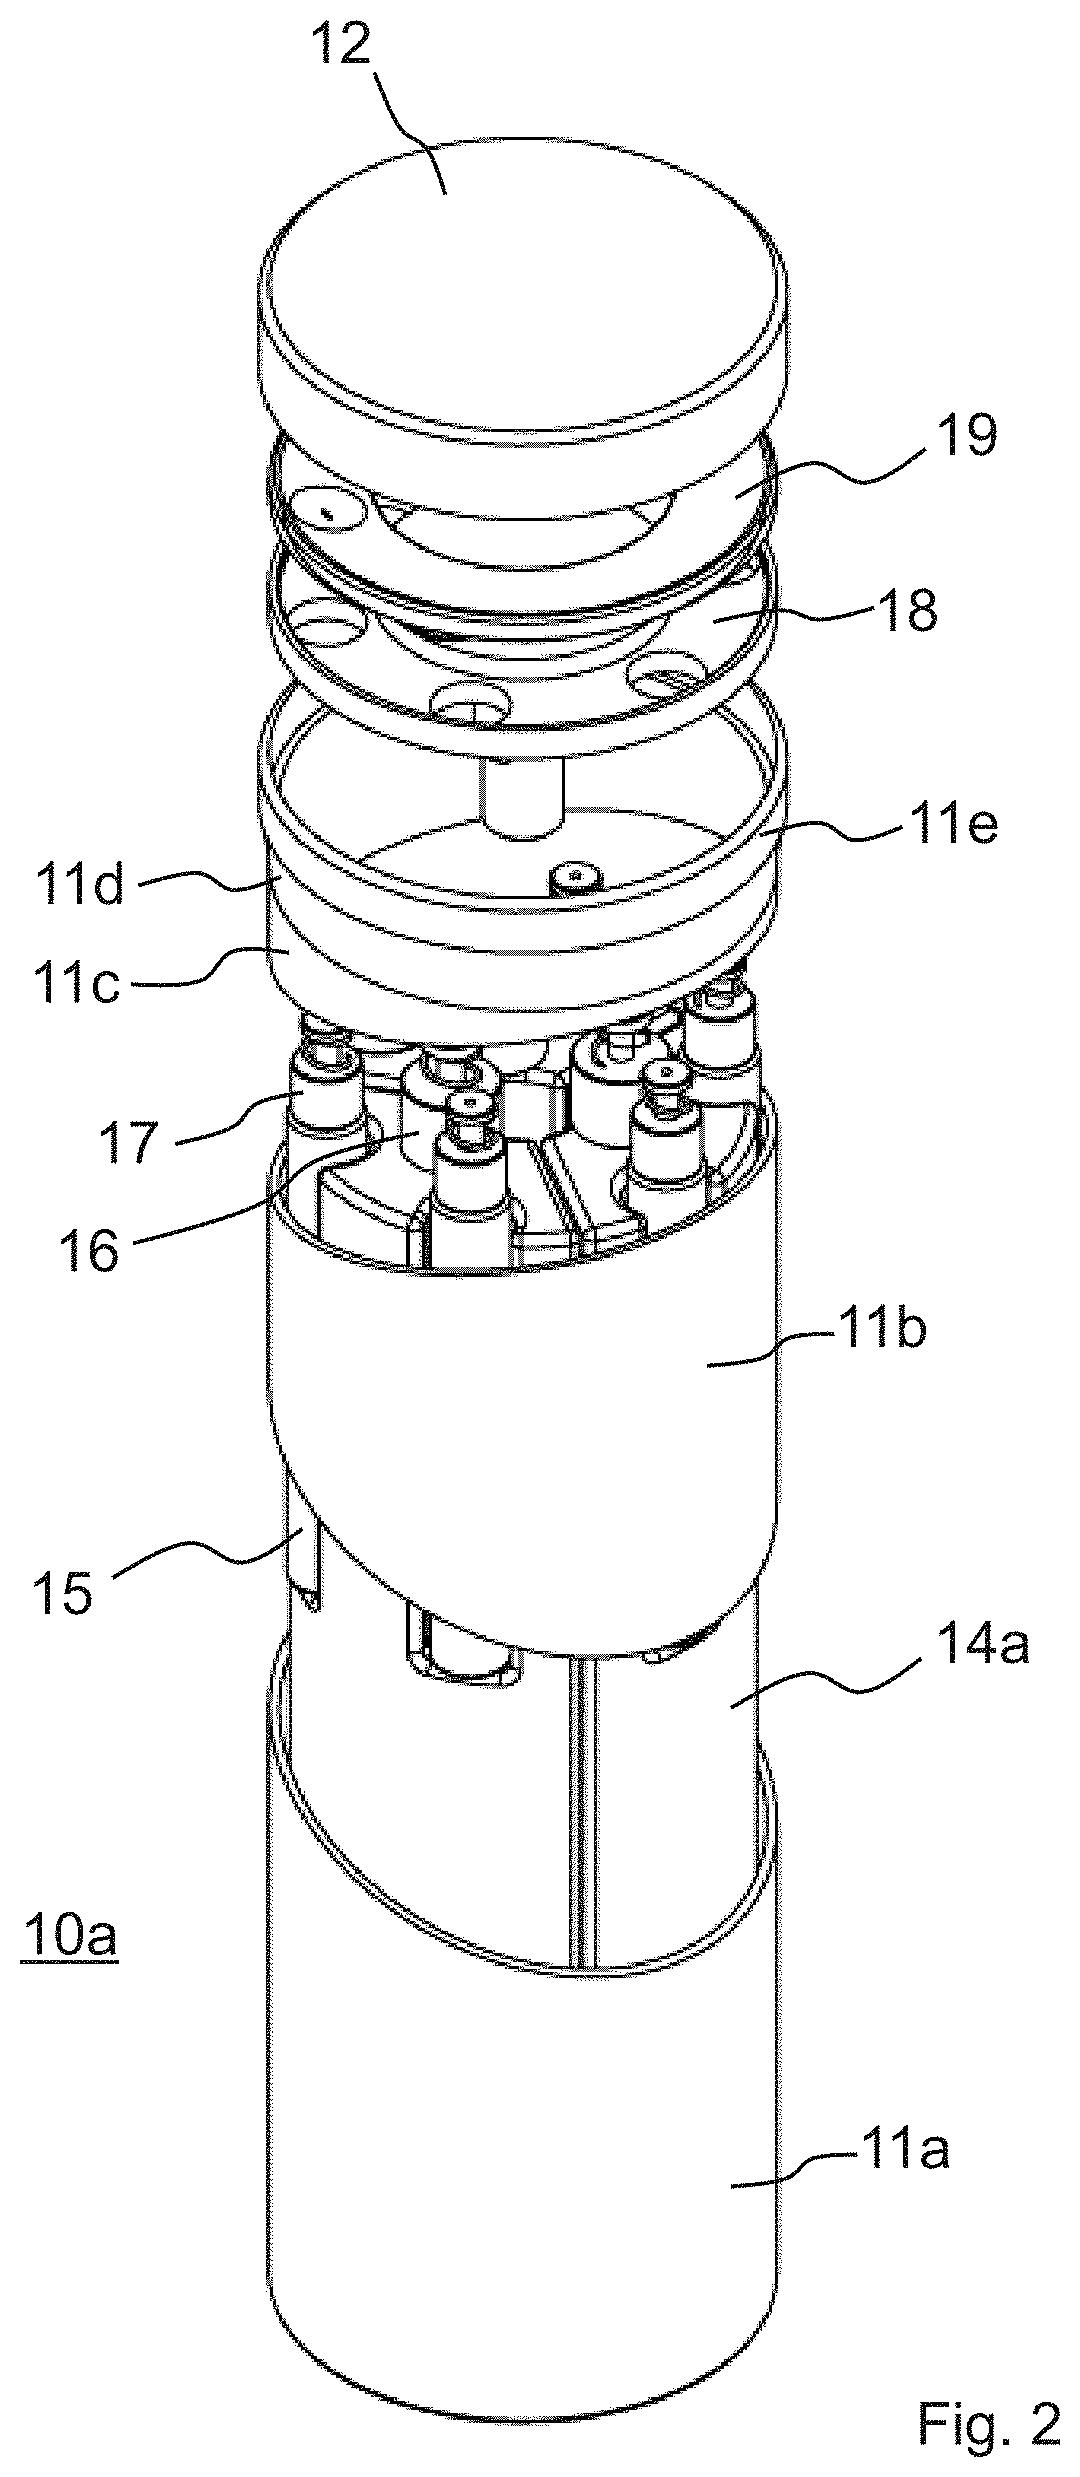 Device for dispensing a formulation of at least two compounds selected from a set of selectable compounds and associated container